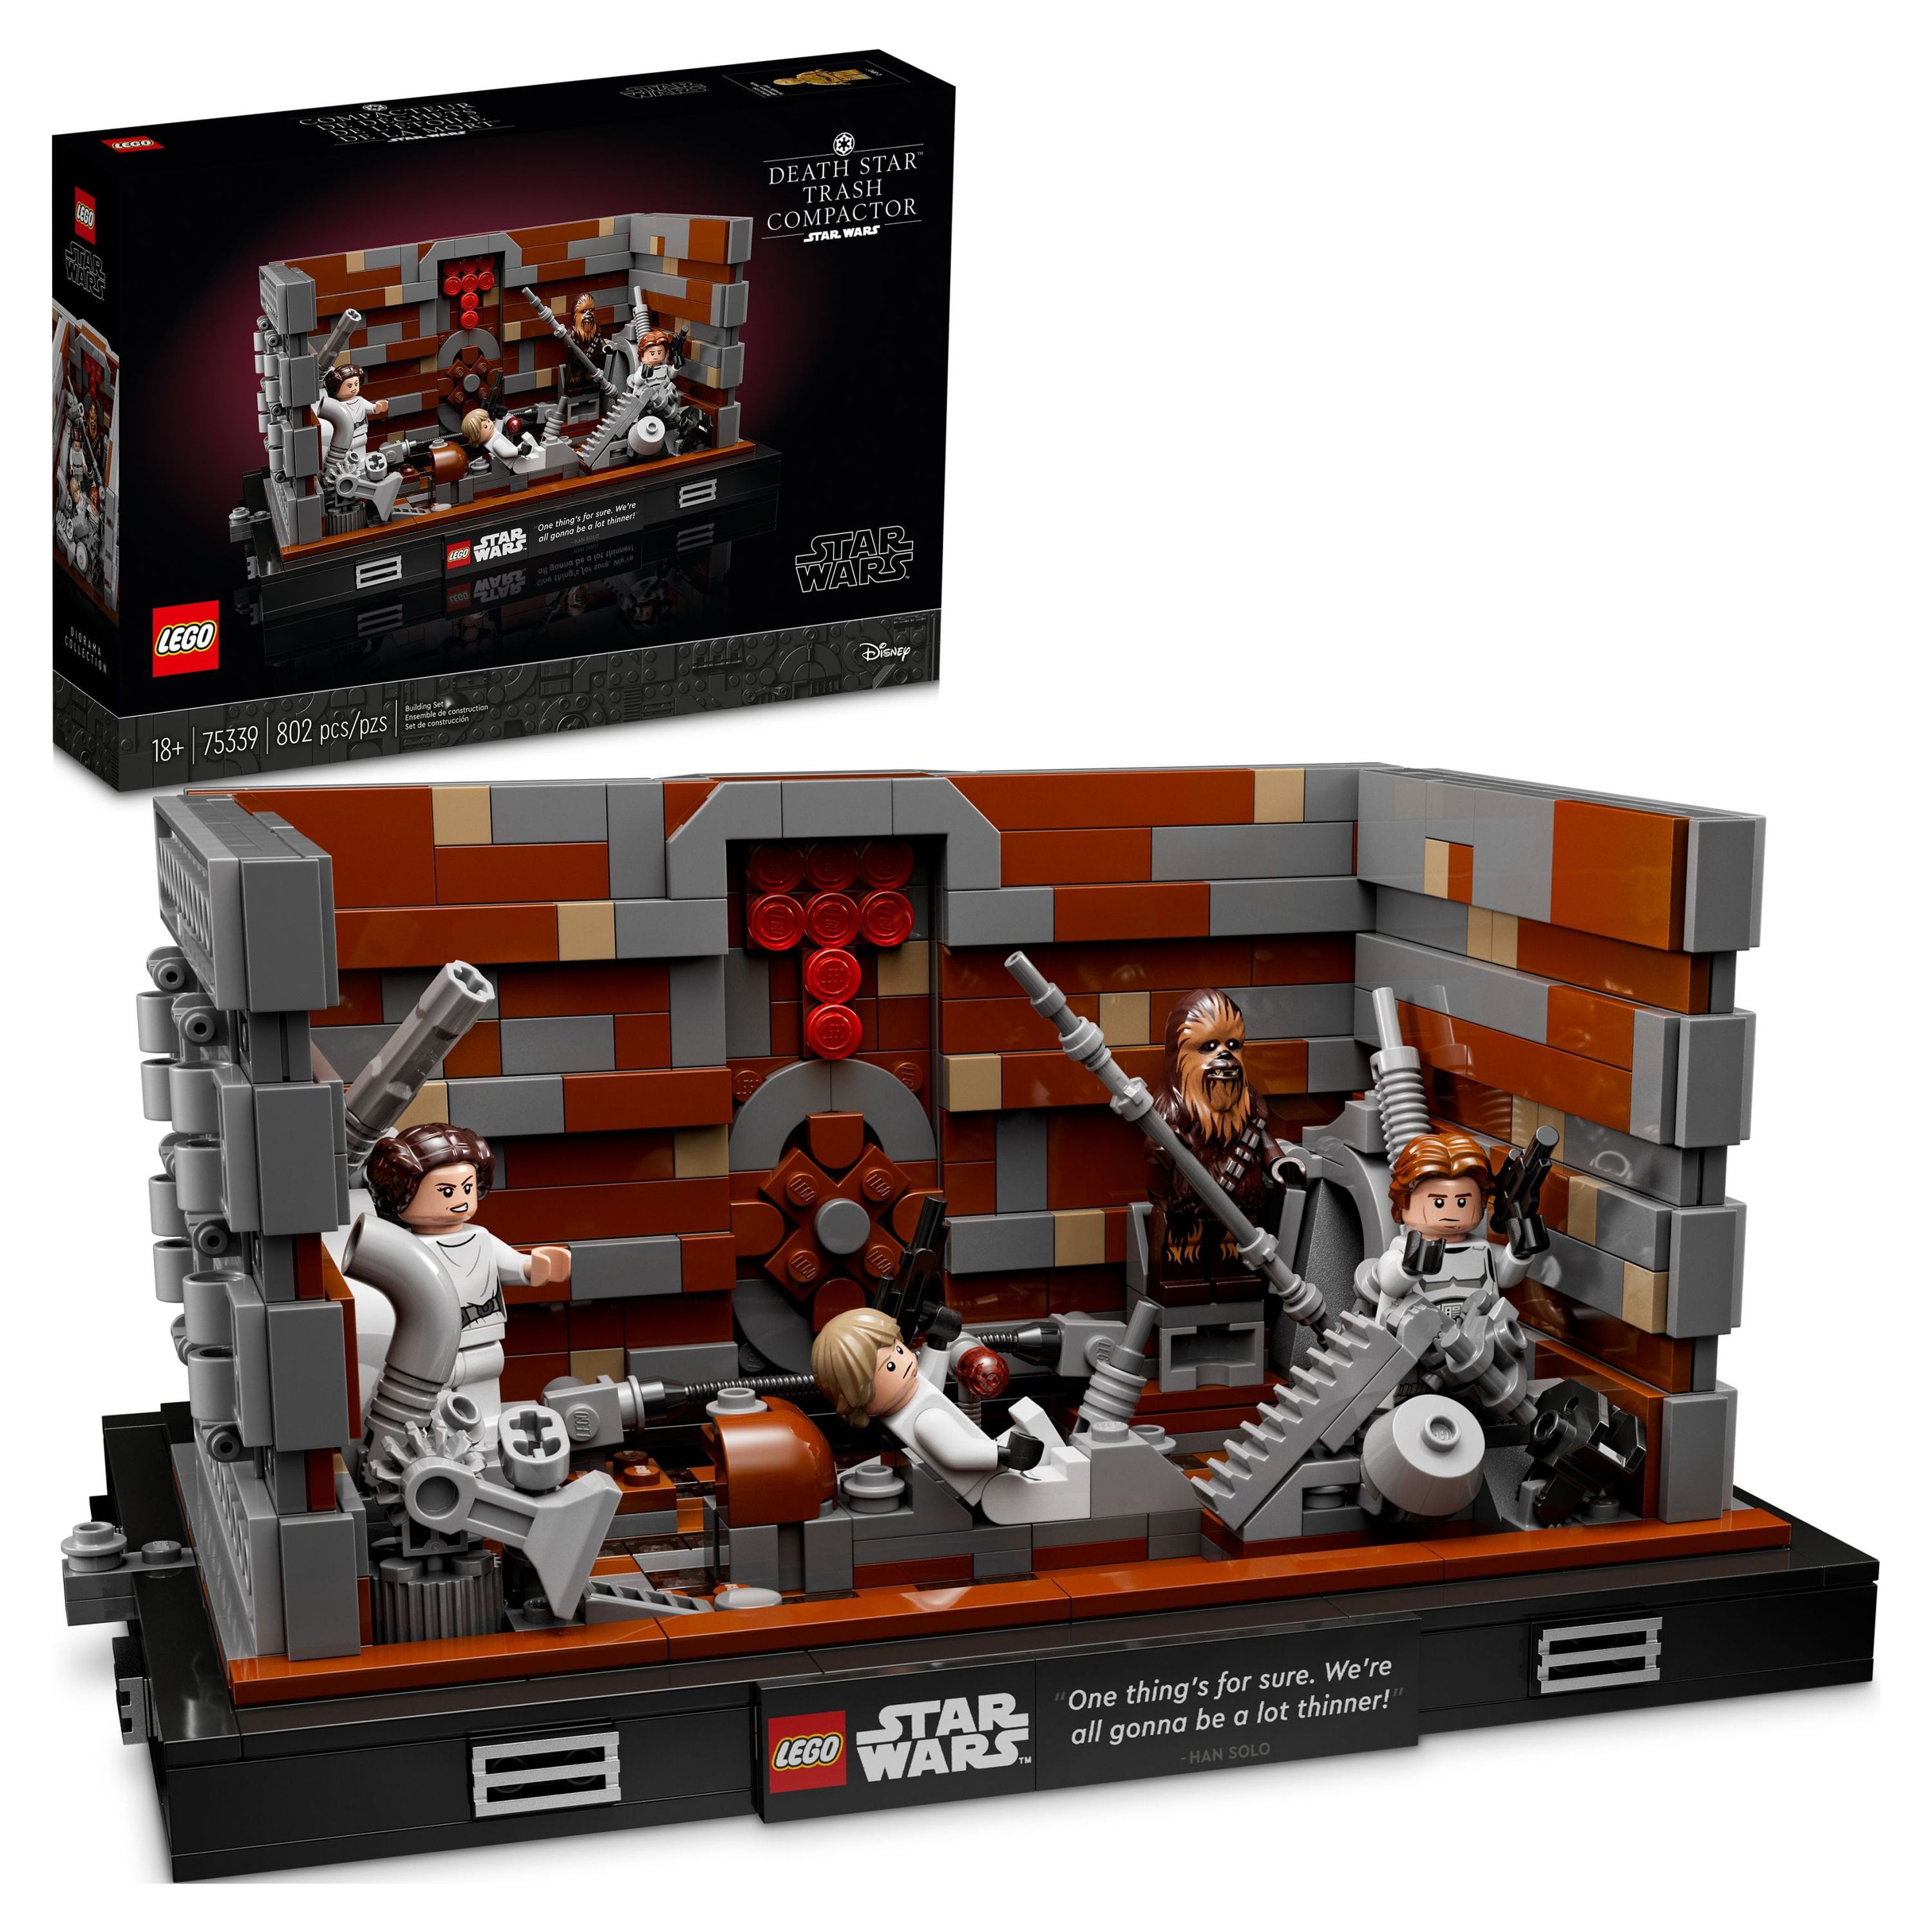 LEGO Star Wars Death Star Trash Compactor Diorama Series 75339 Adult Building Set with 6 Star Wars Figures including Princess Leia, Chewbacca & R2-D2, Gift for Star Wars Fans - image 1 of 8